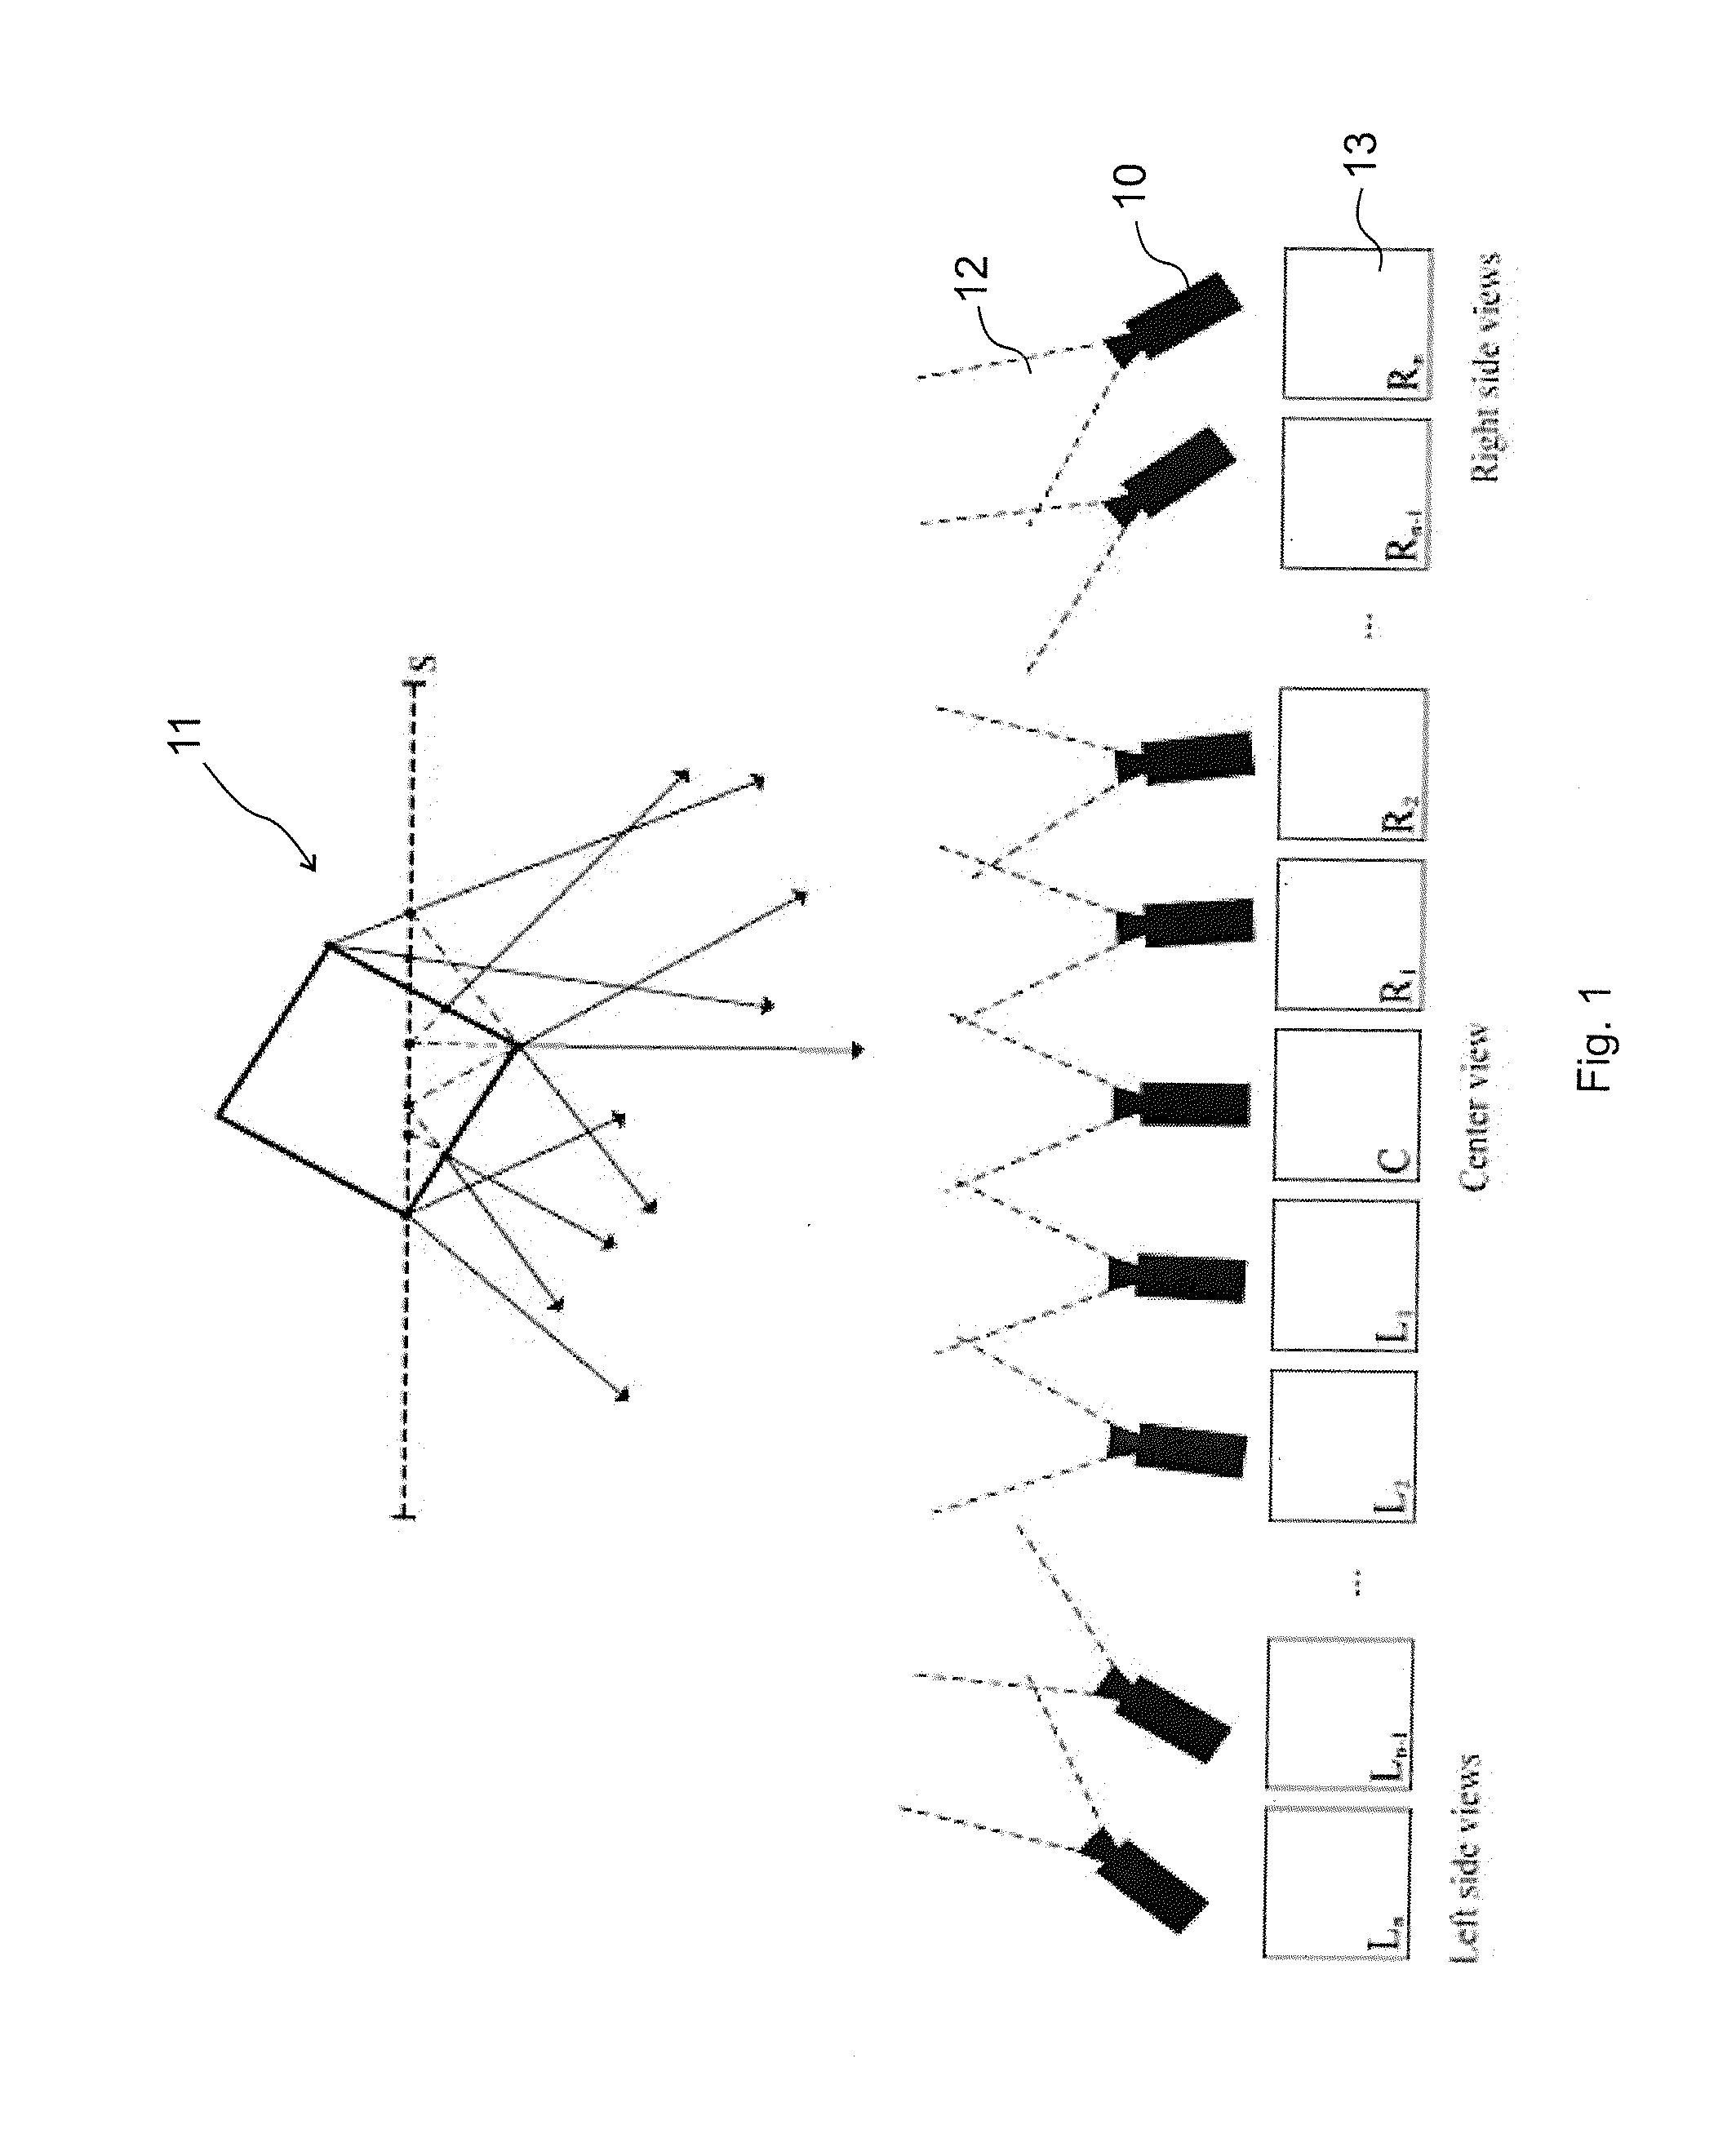 Image Coding And Decoding Method And Apparatus For Efficient Encoding And Decoding Of 3D Light Field Content